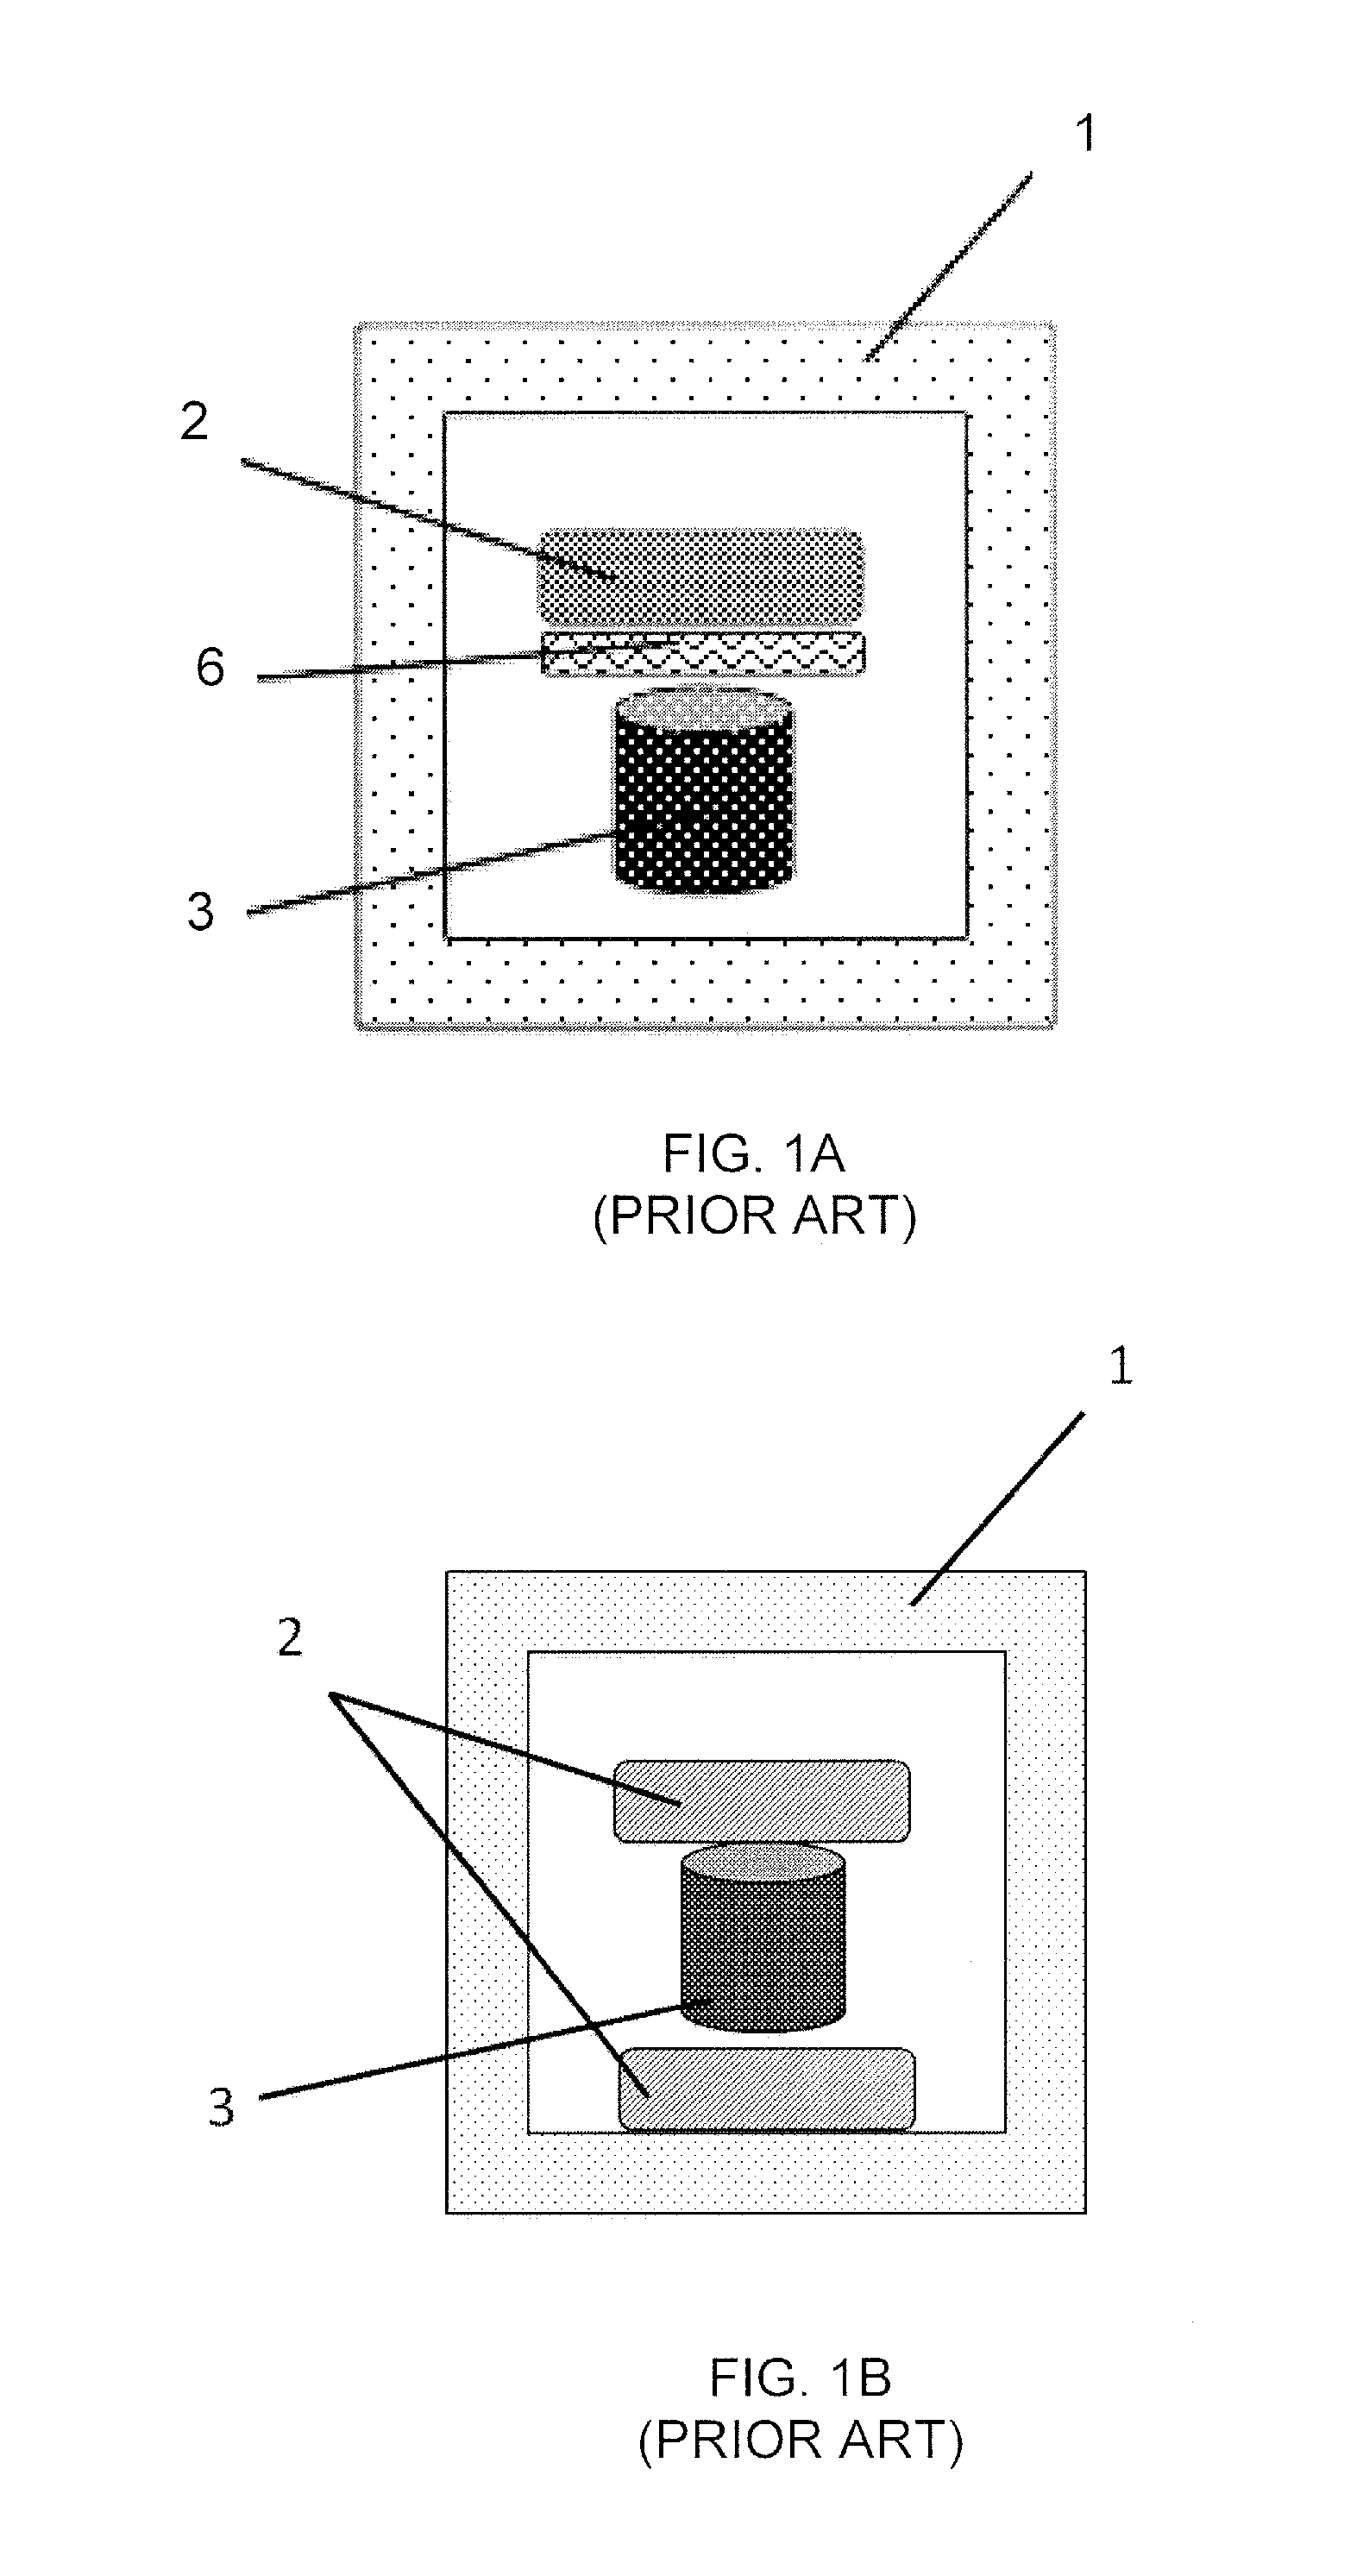 Method and Apparatus for Thermally Protecting and/or Transporting Temperature Sensitive Products